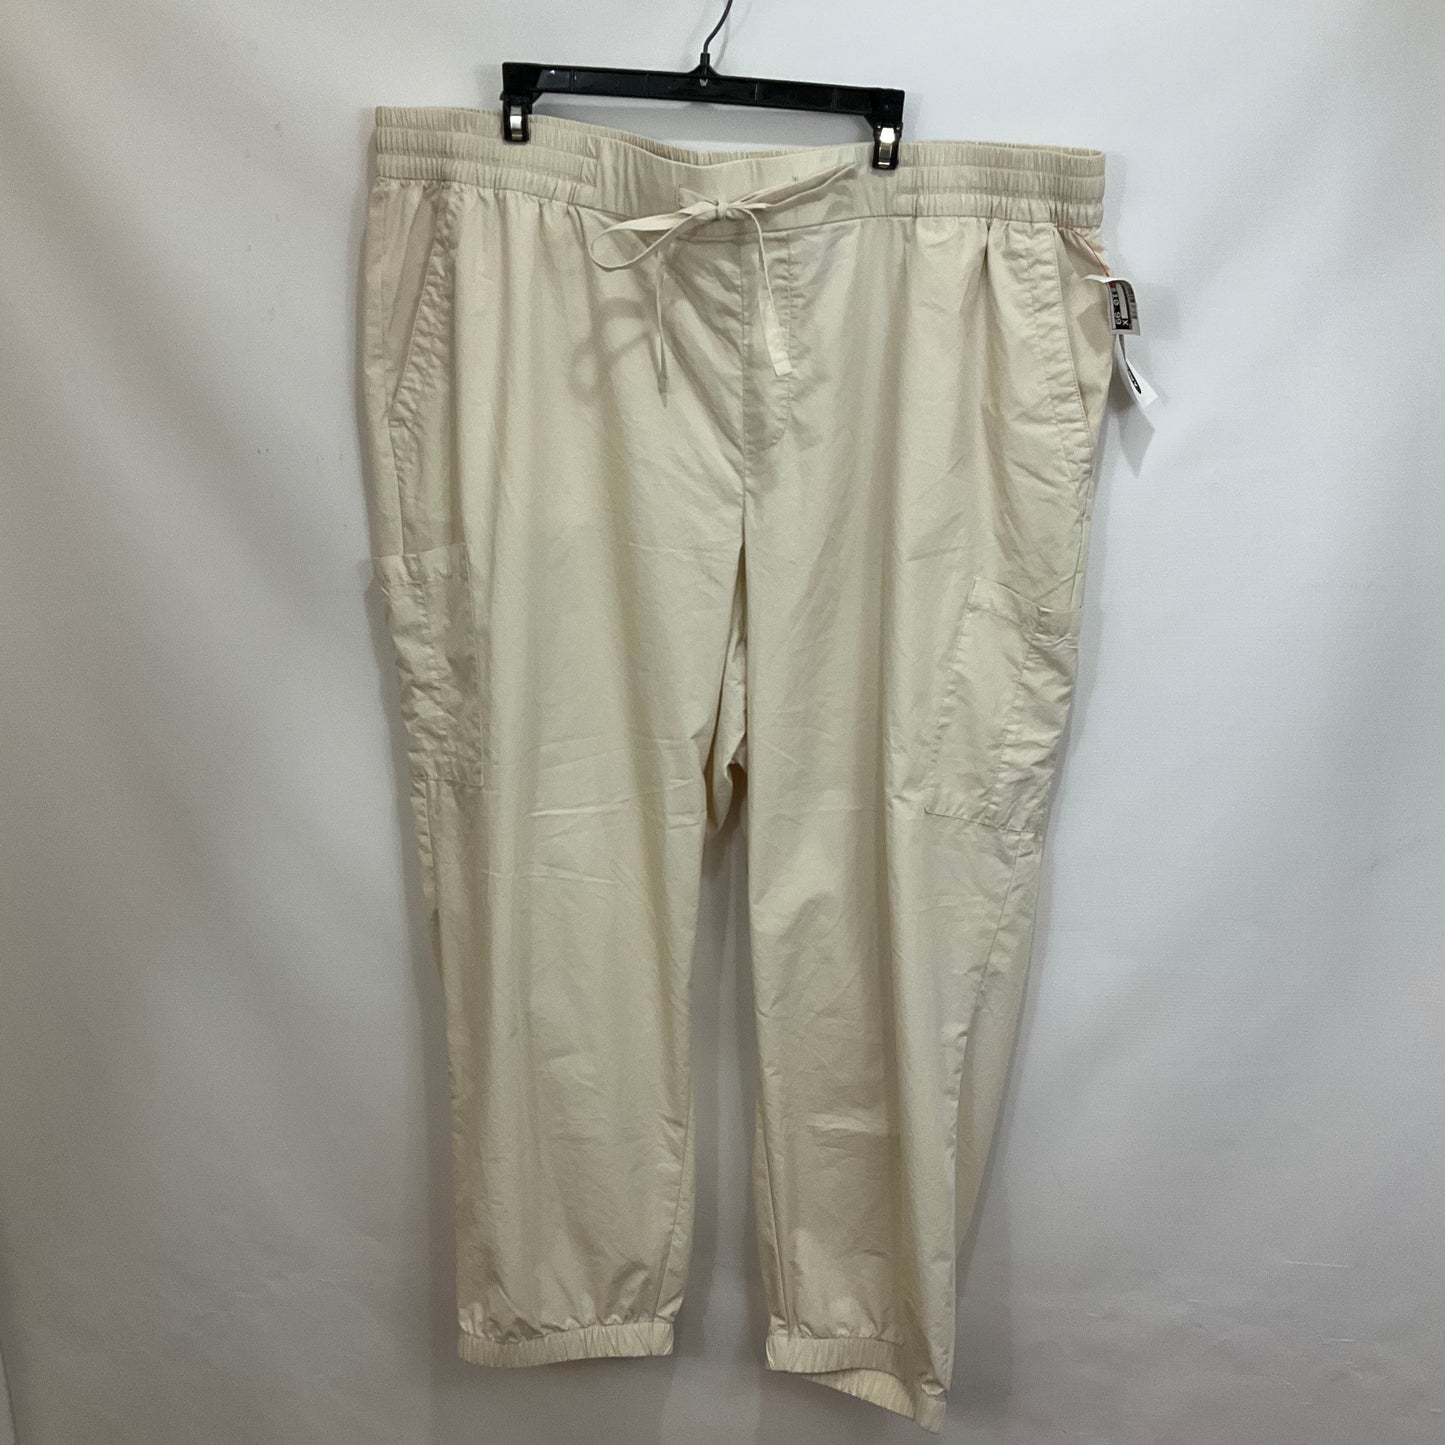 Pants Ankle By Old Navy  Size: 3x